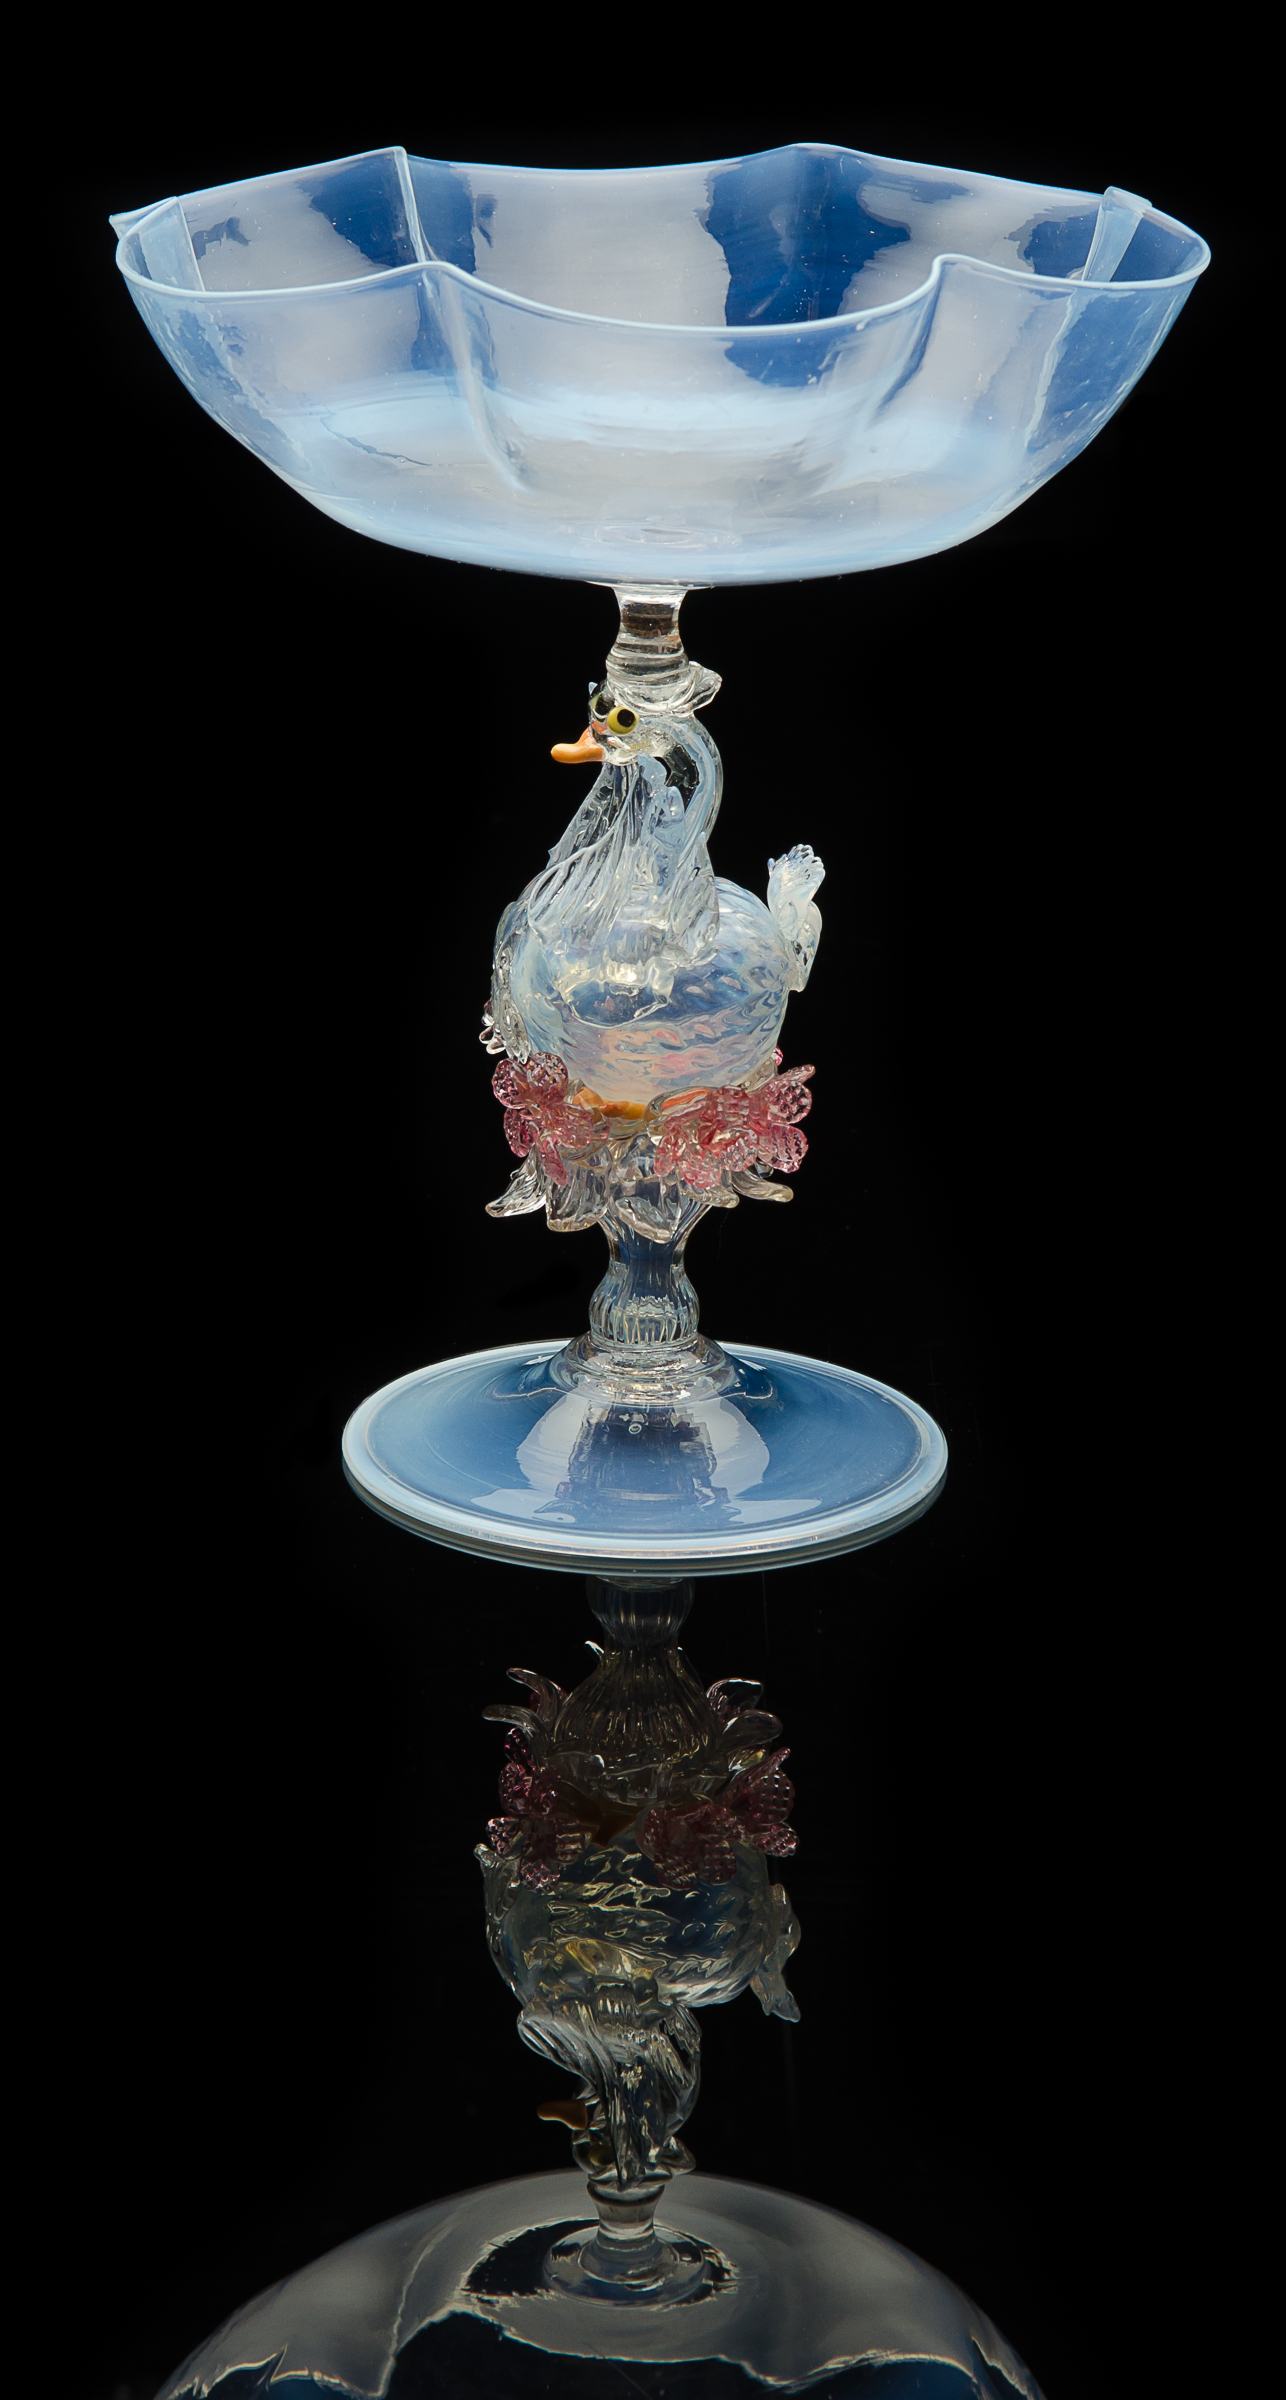  Salviati and Company,  Opalescent Champagne Glass with Swan Stem  (circa 1890, glass, 7 7/8 inches), VV.65 